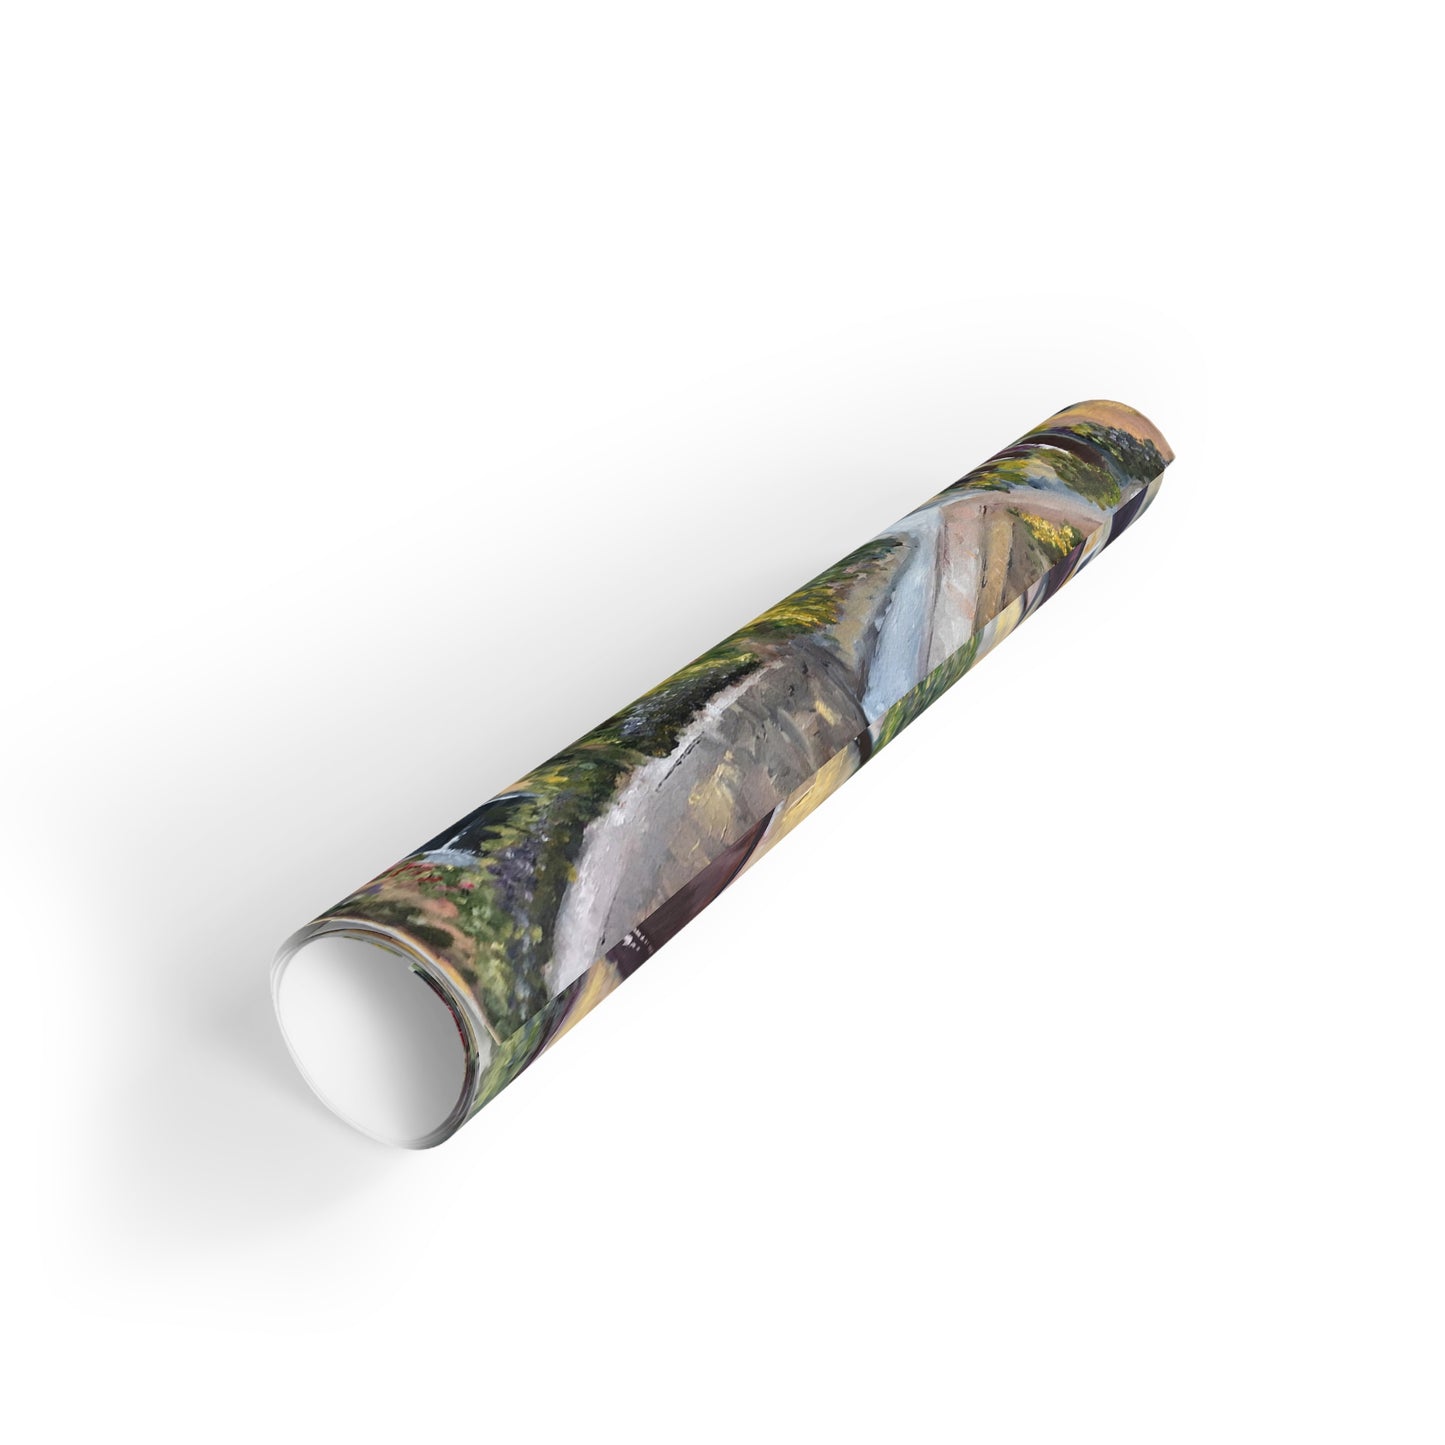 Original Oil Painting Castle Combe Cotswolds Wilshire printed Gift Wrapping Paper Rolls, 1pc